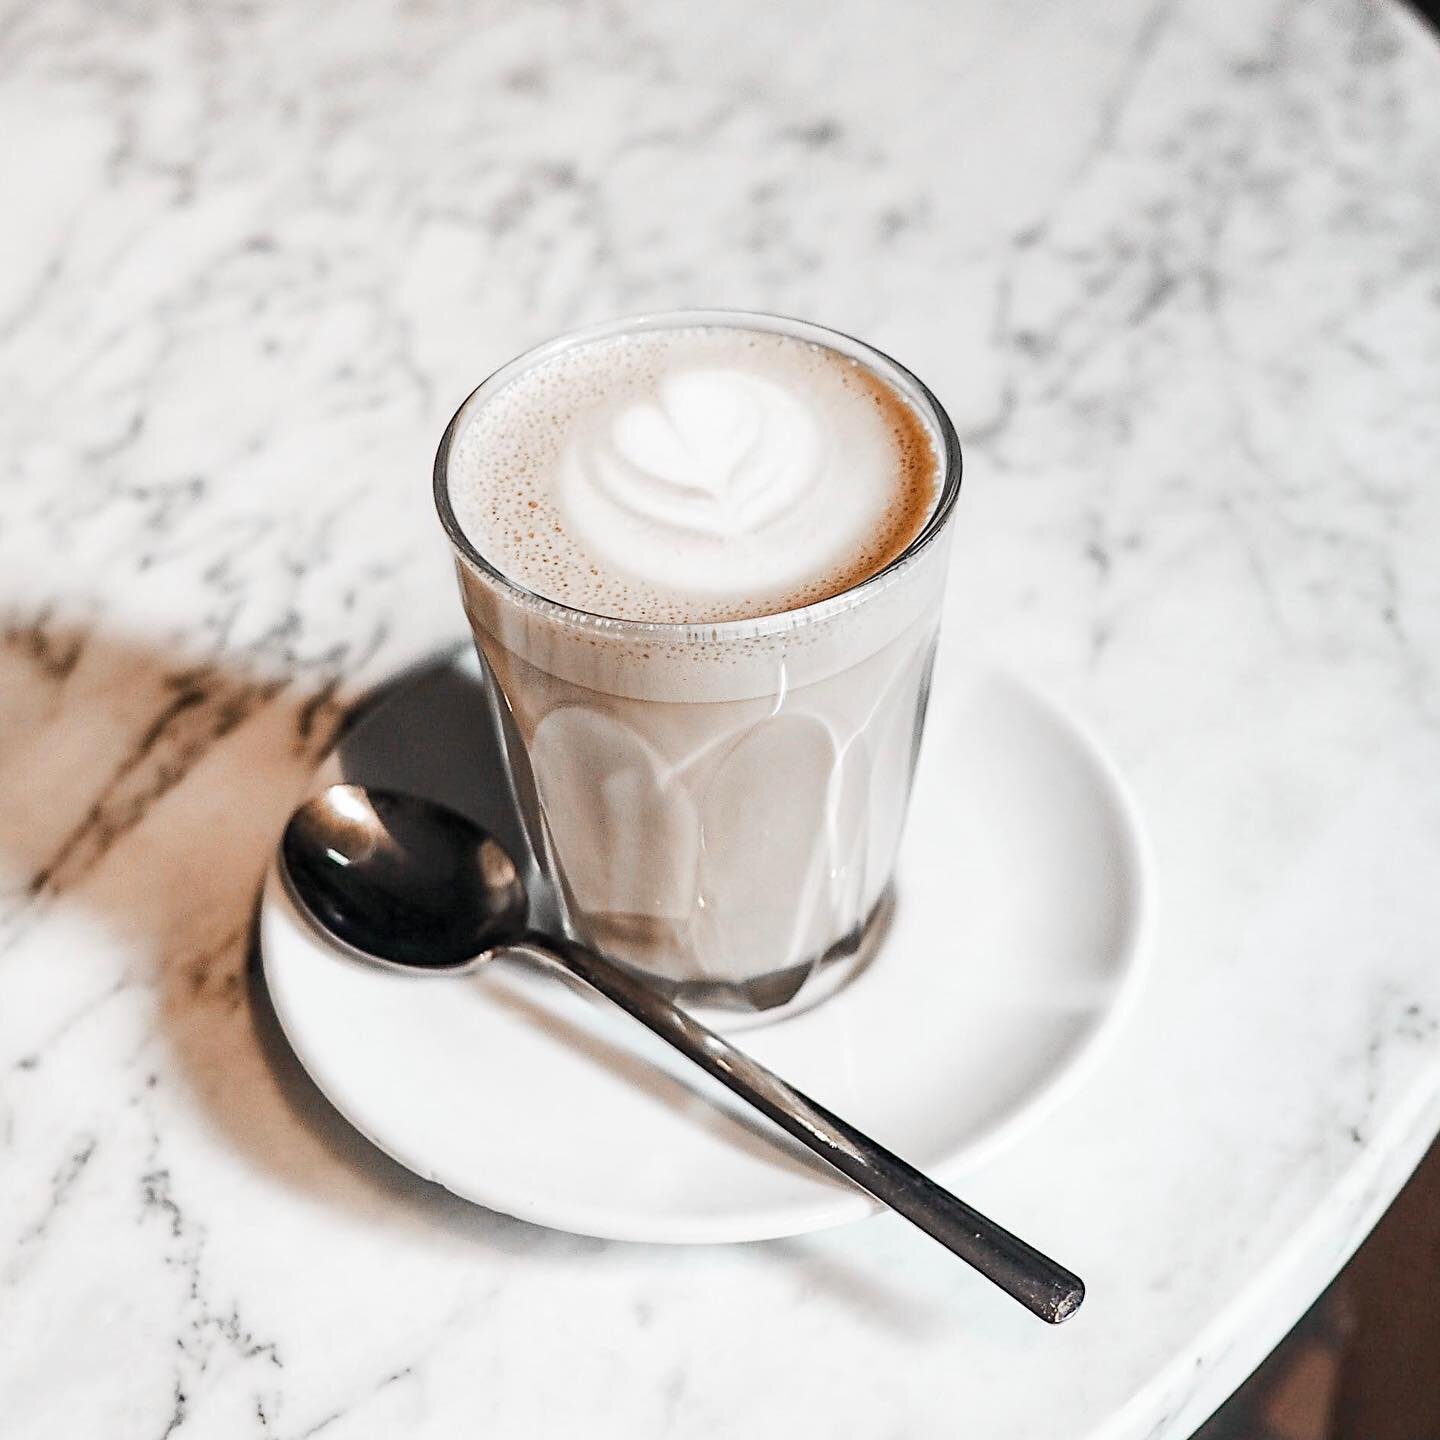 Cafe latte time ☕️

Edited with our Clean White presets (link in bio to shop)!
__________________________________
#mobilelightroompresets #BlvckMediaPresets #PresetKauppa #lightroompresets #lightroomfilters #mobilelightroomedit #lightroomedit #before